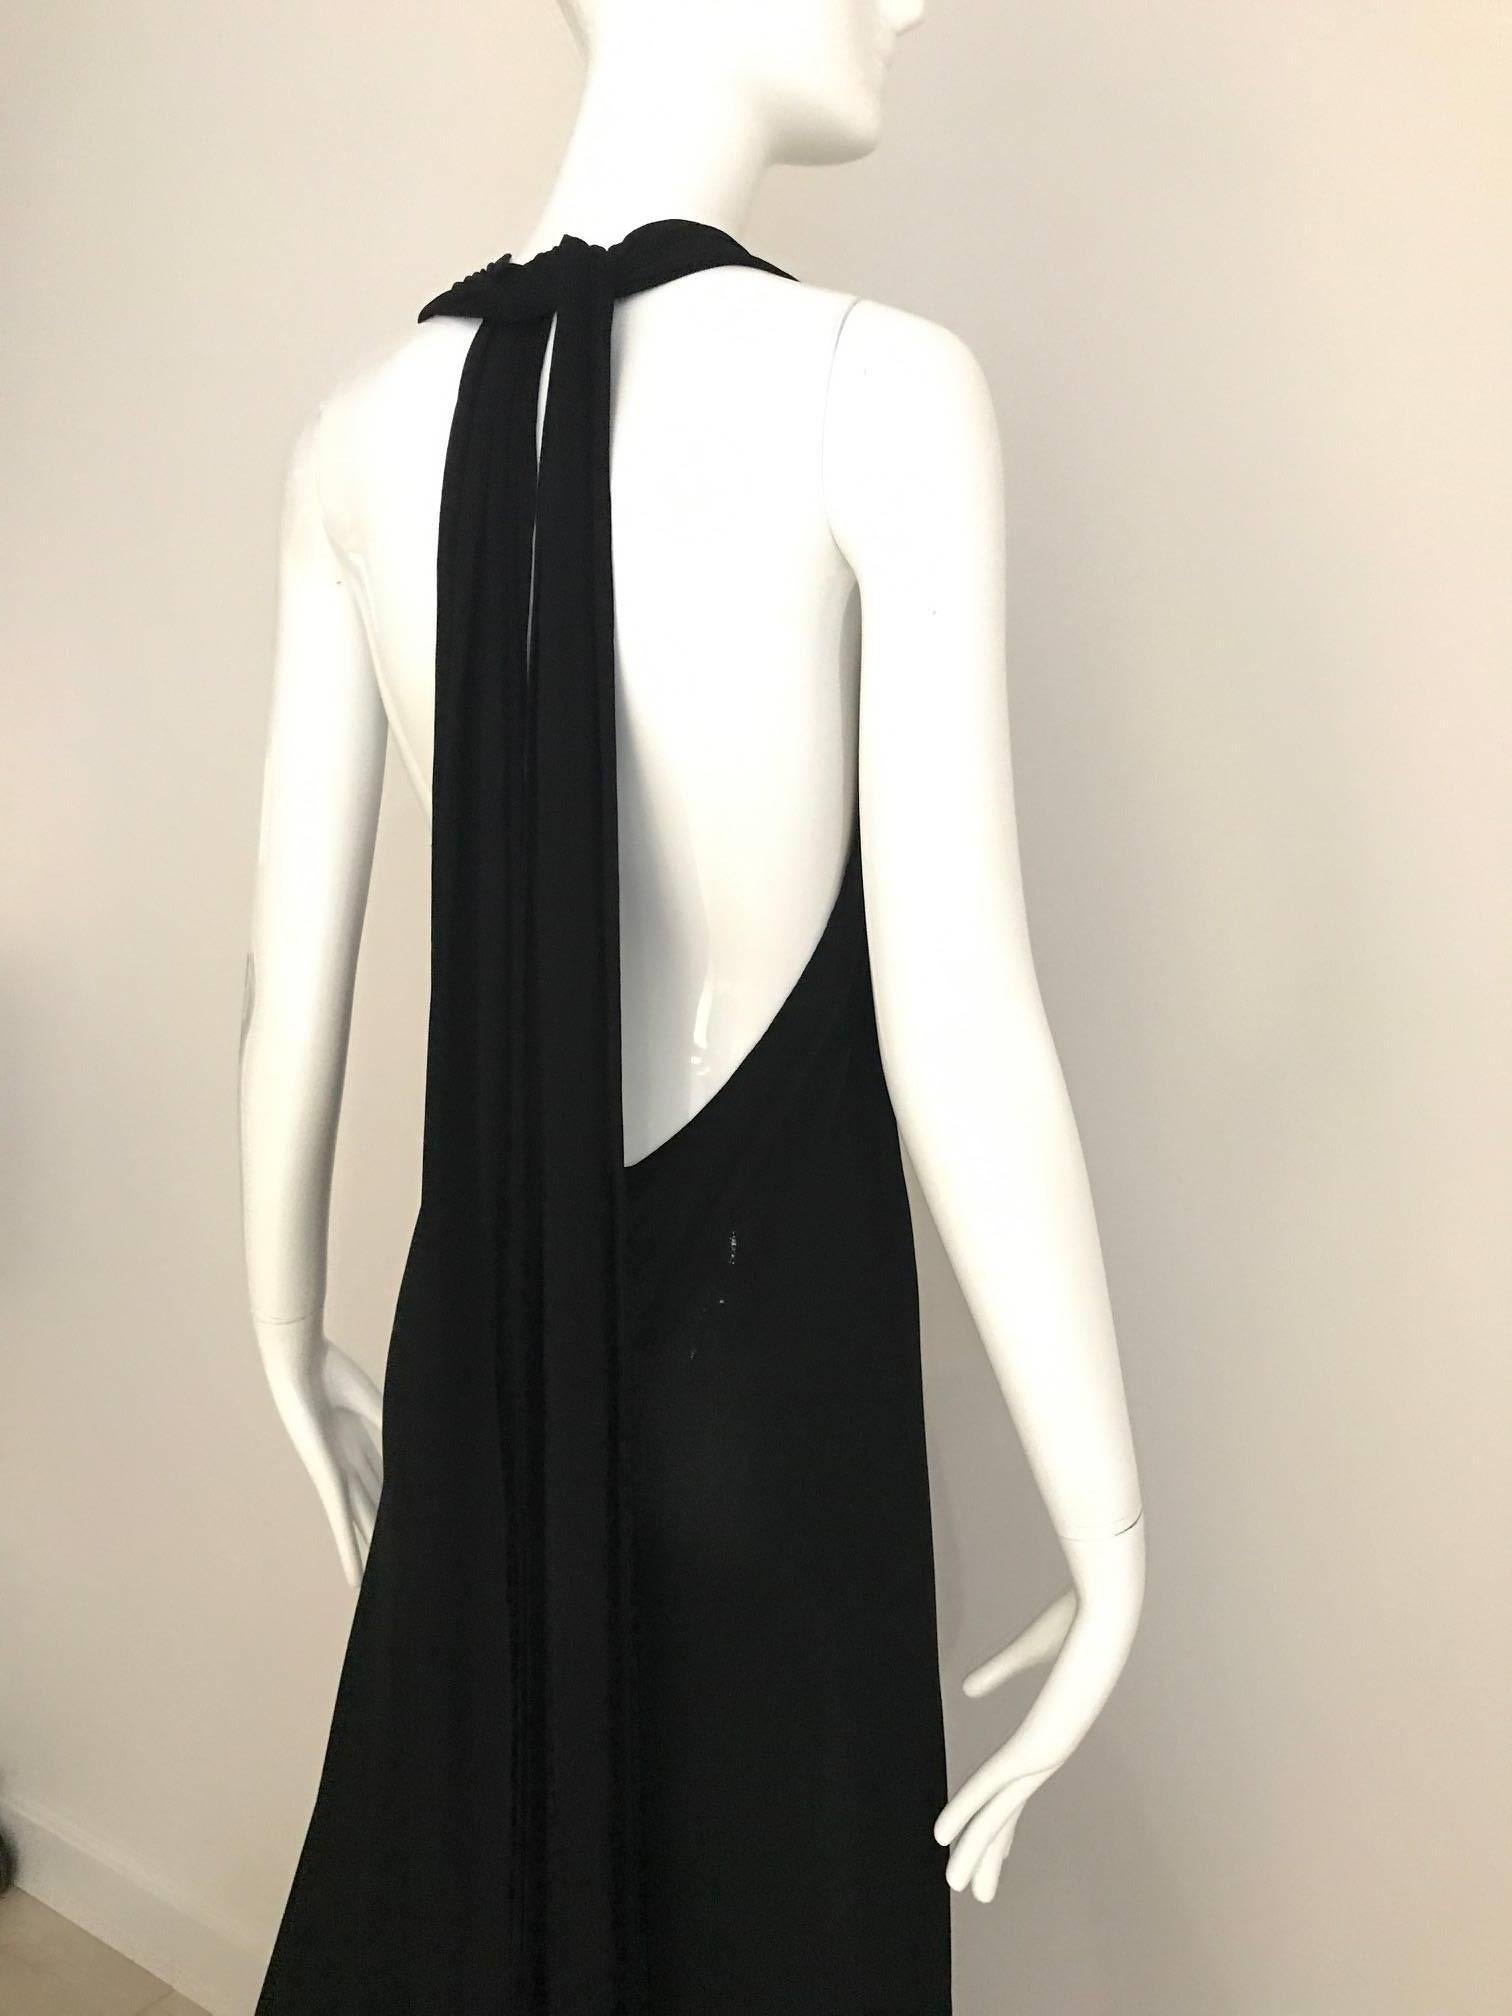 1970s HALSTON Black Jersey Plunging Neckline 70s Vintage Gown with long train 1